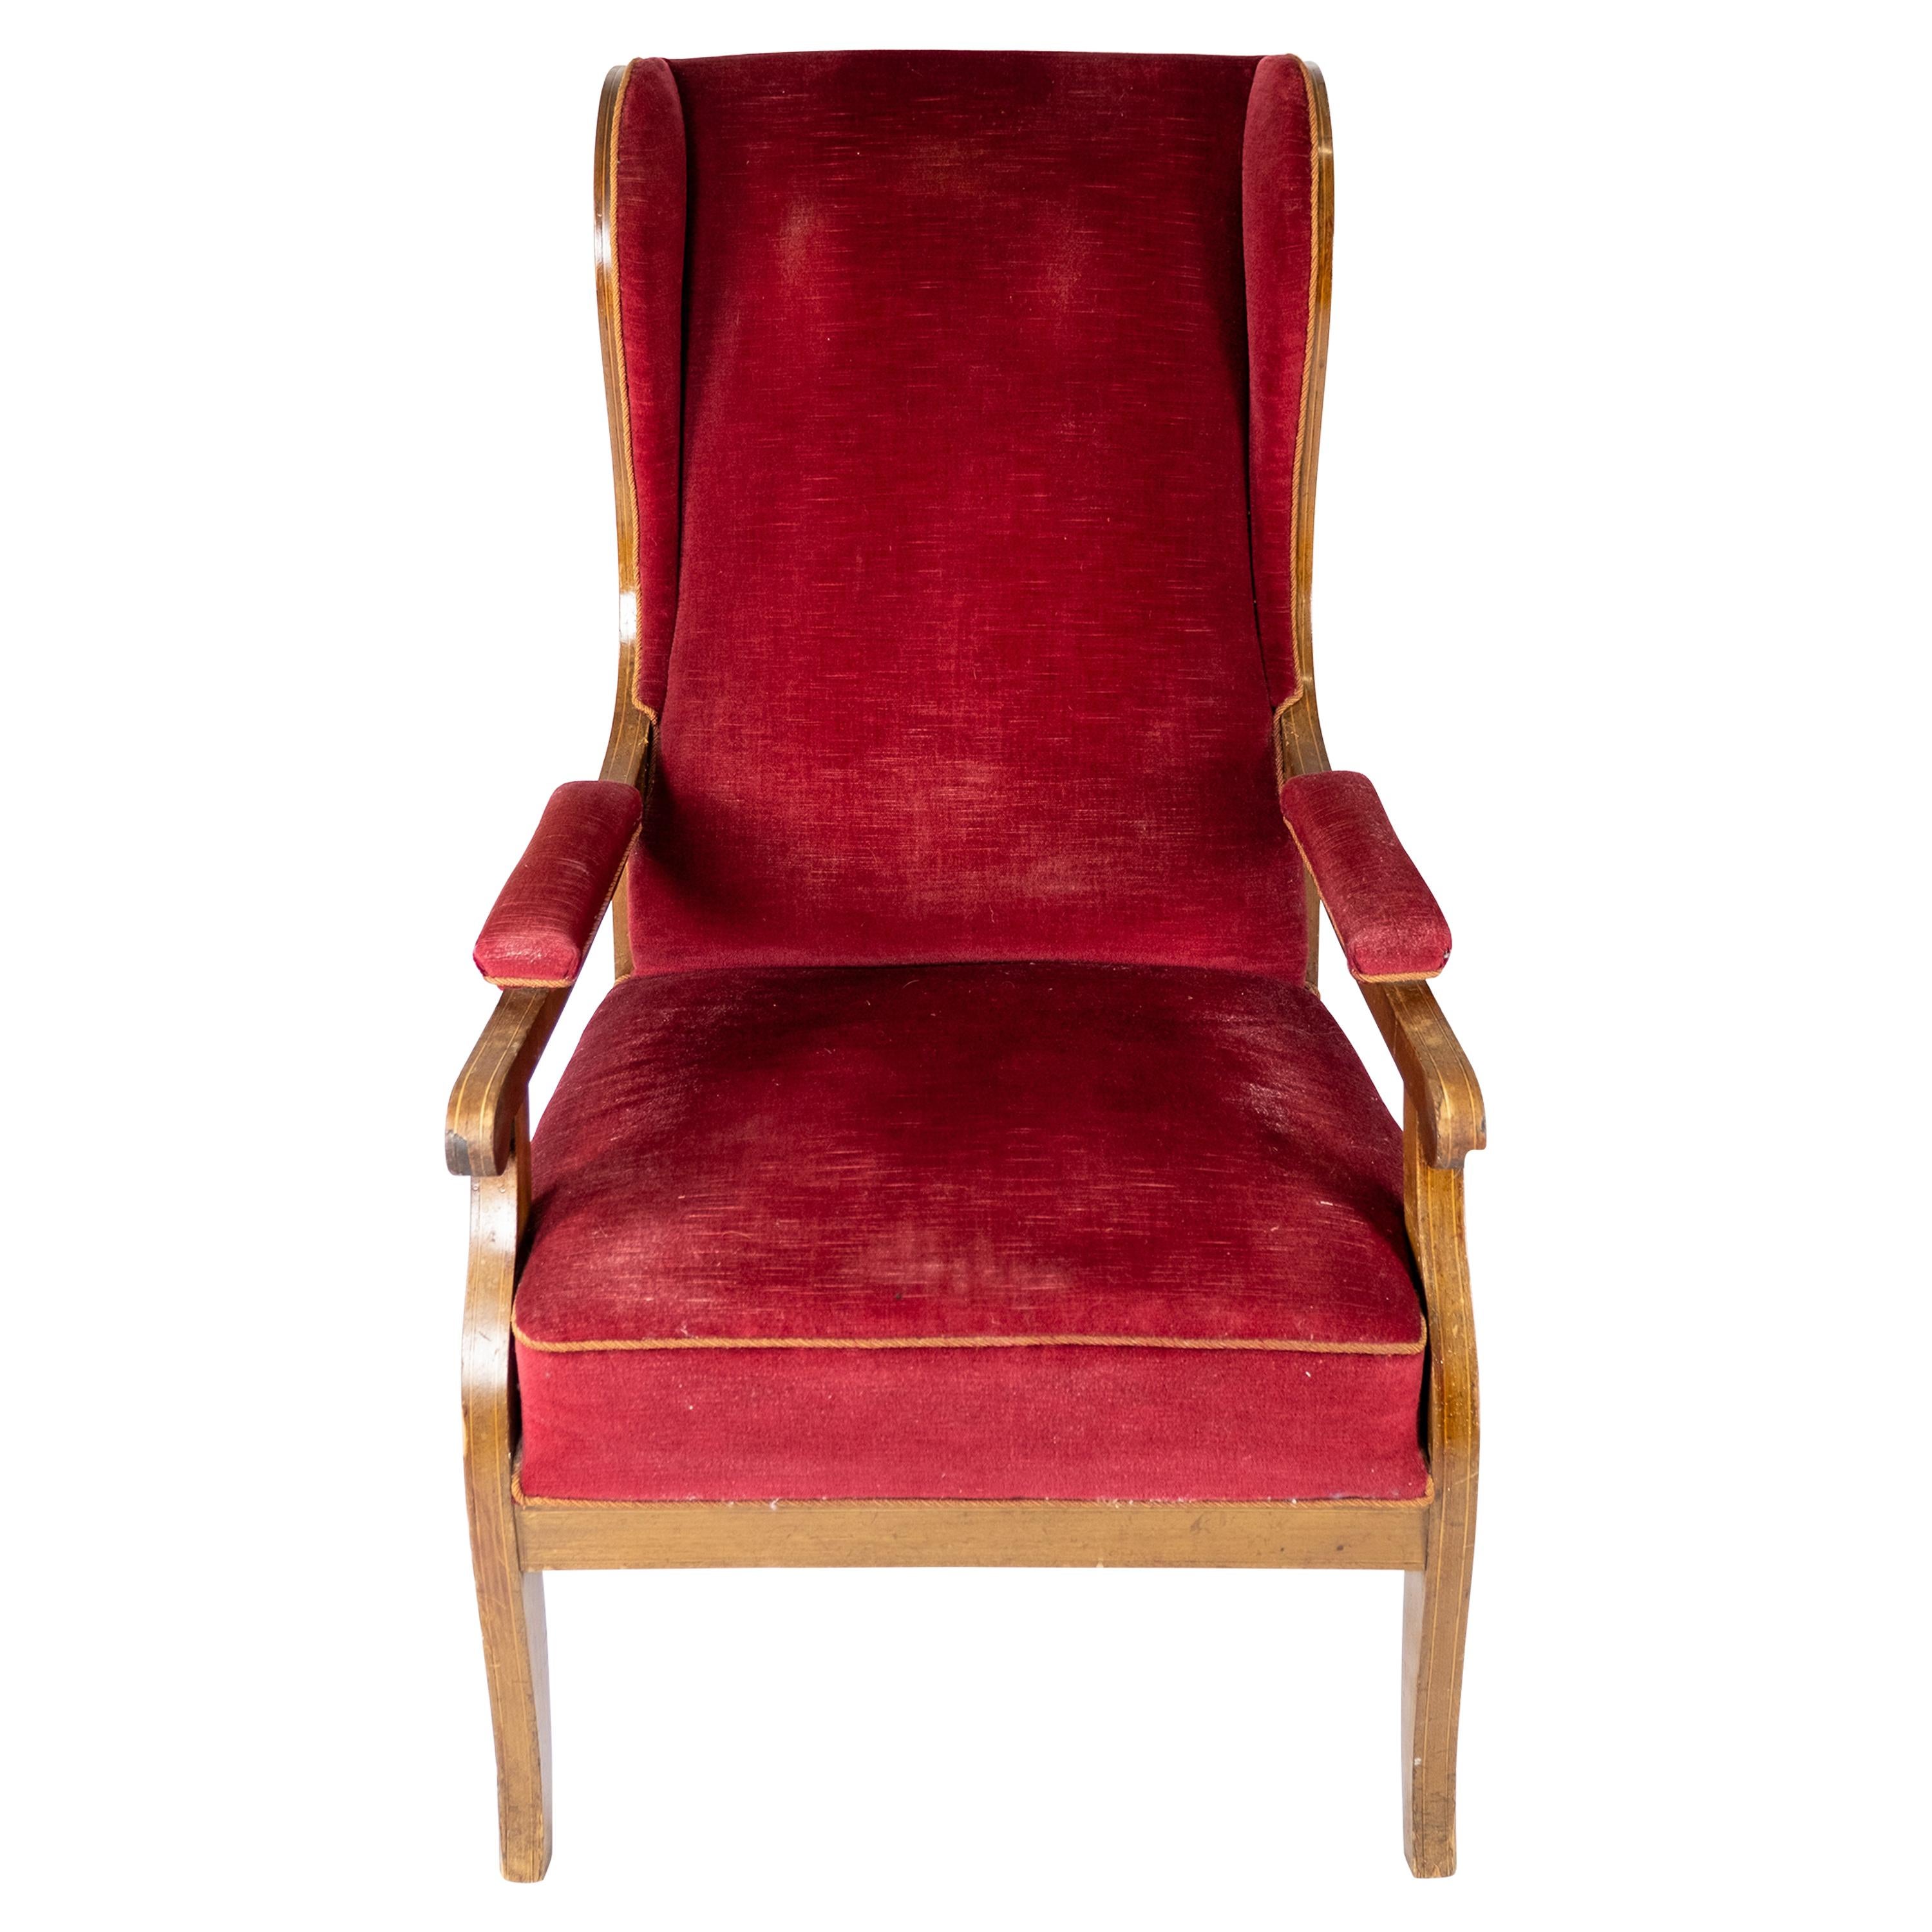 Armchair Upholstered with Red Velvet and Mahogany Designed by Frits Henningsen